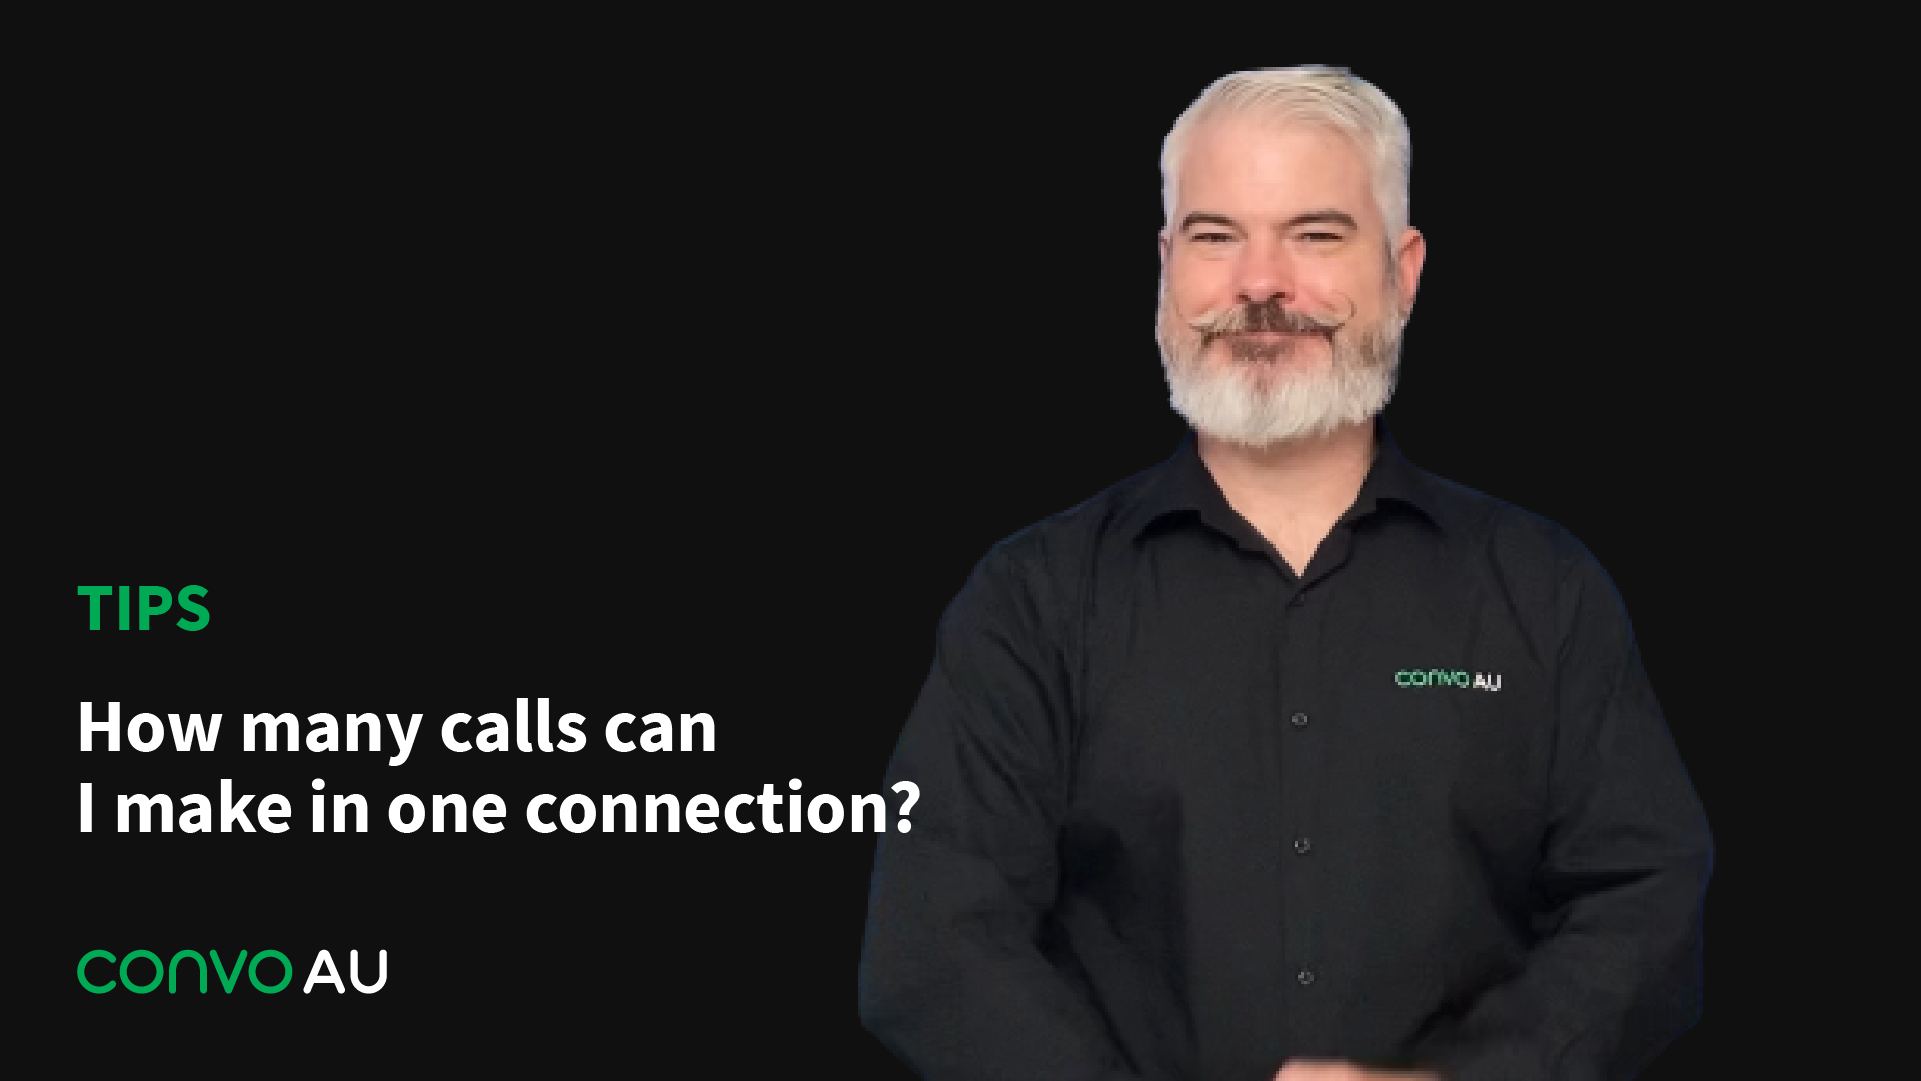 Tips: How many calls can I make in one connection?